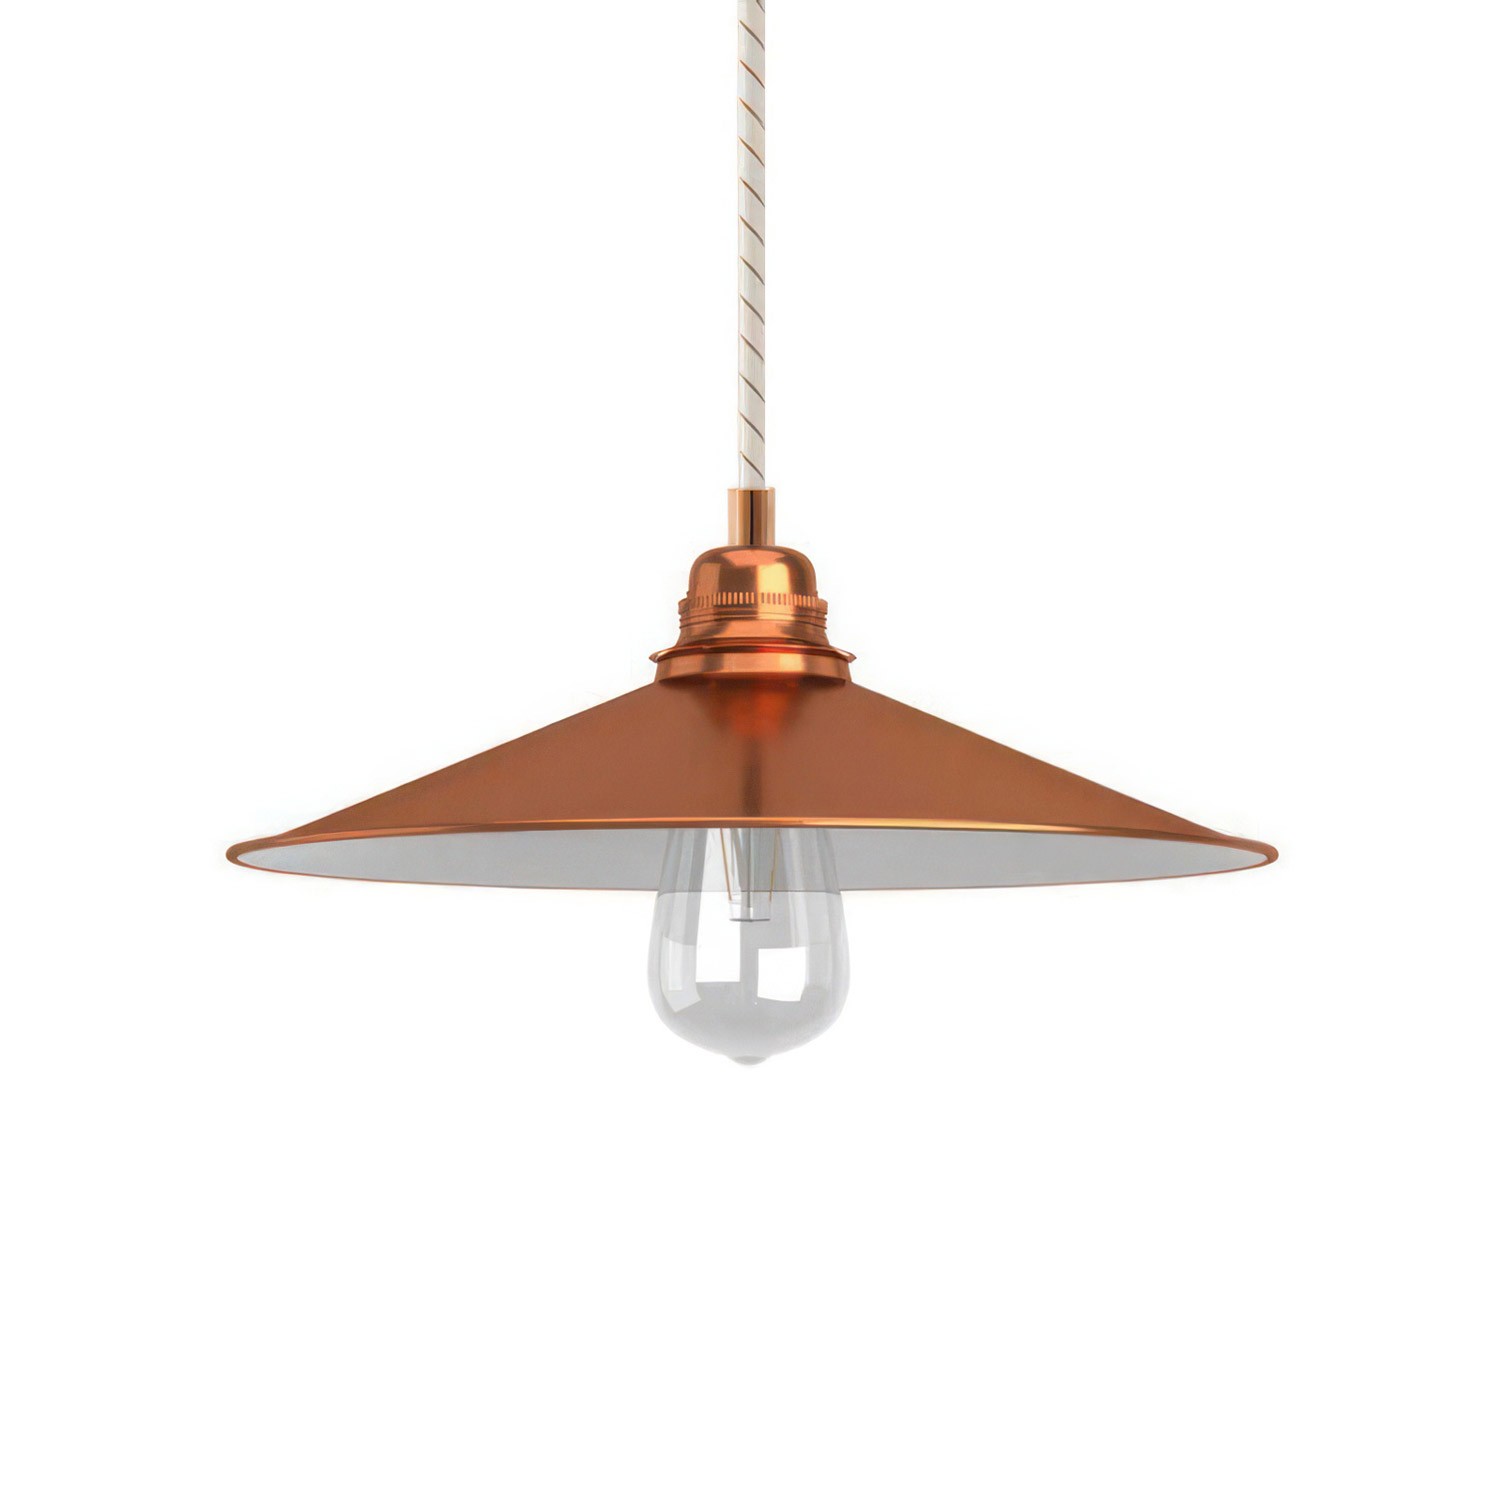 Pendant lamp with textile cable, Swing lampshade and metal details - Made in Italy - Bulb included